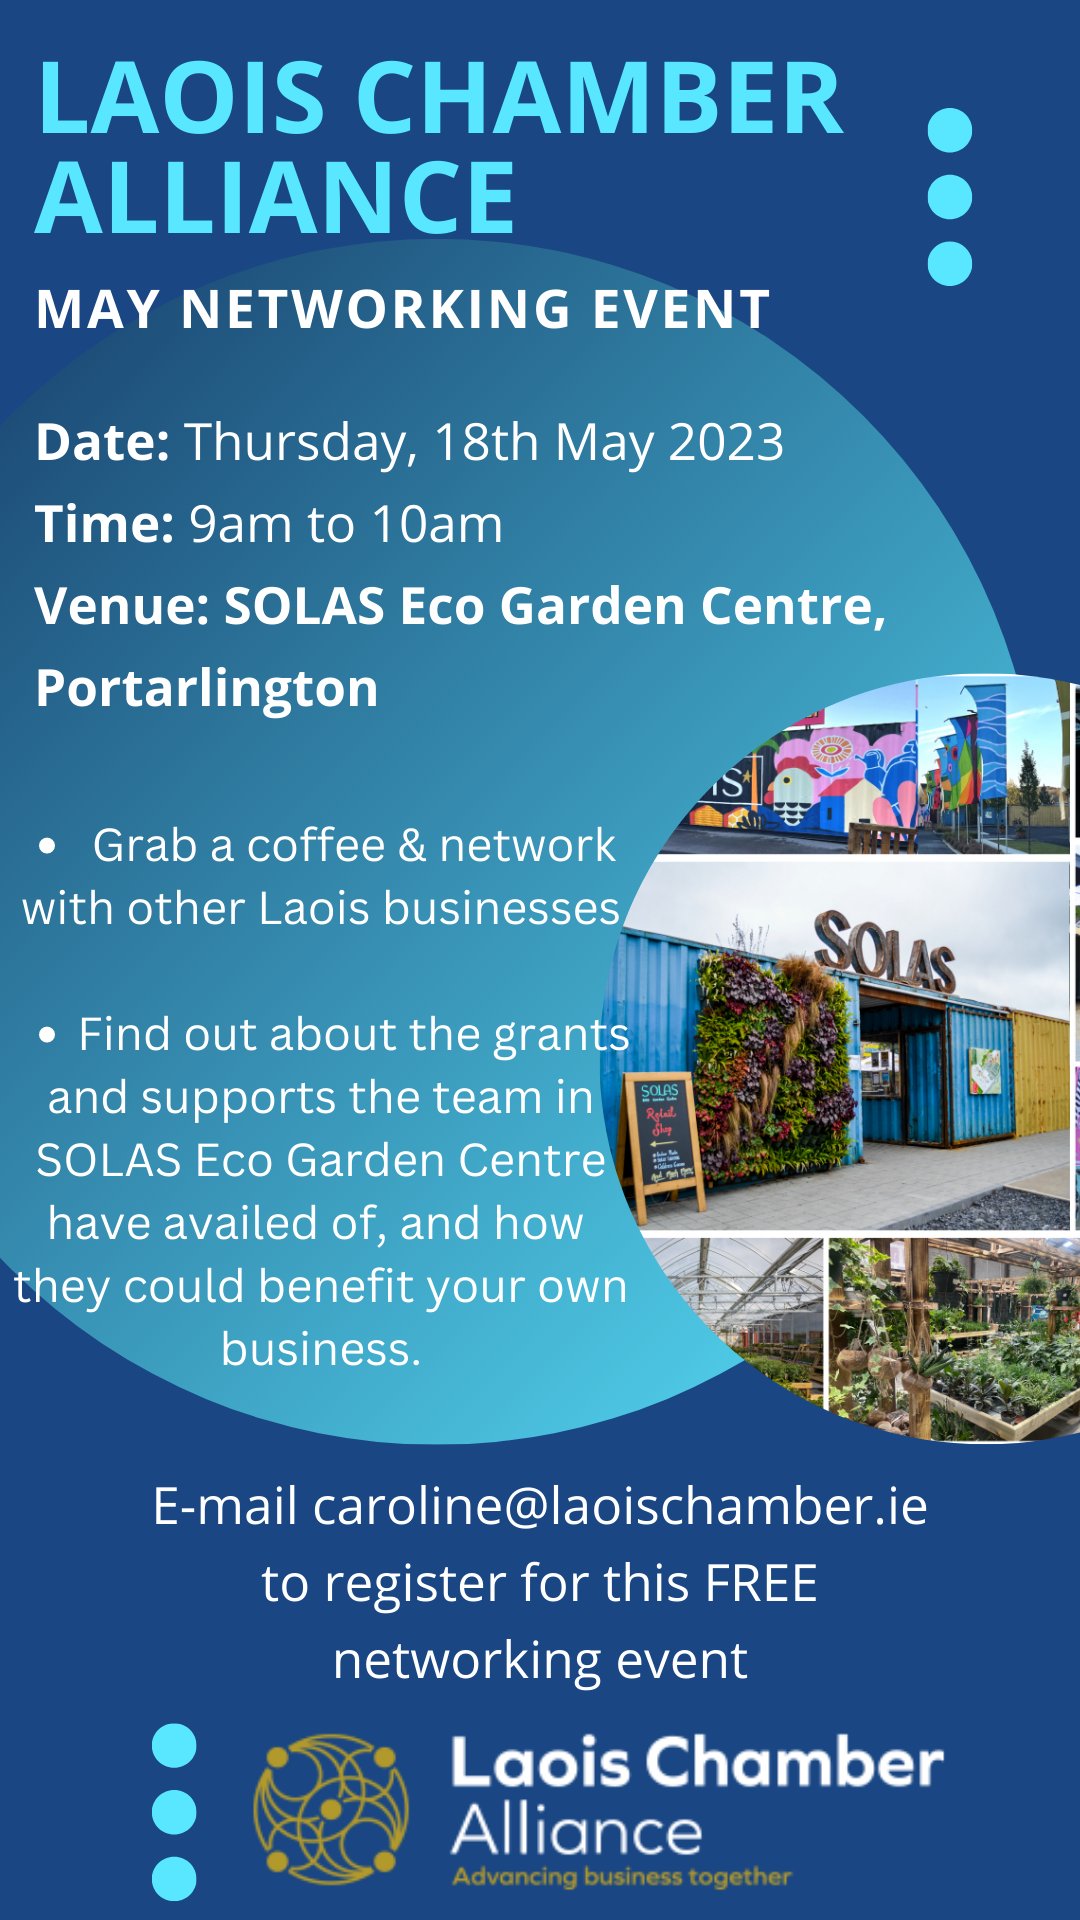 Laois Chamber Alliance May Networking Event Details